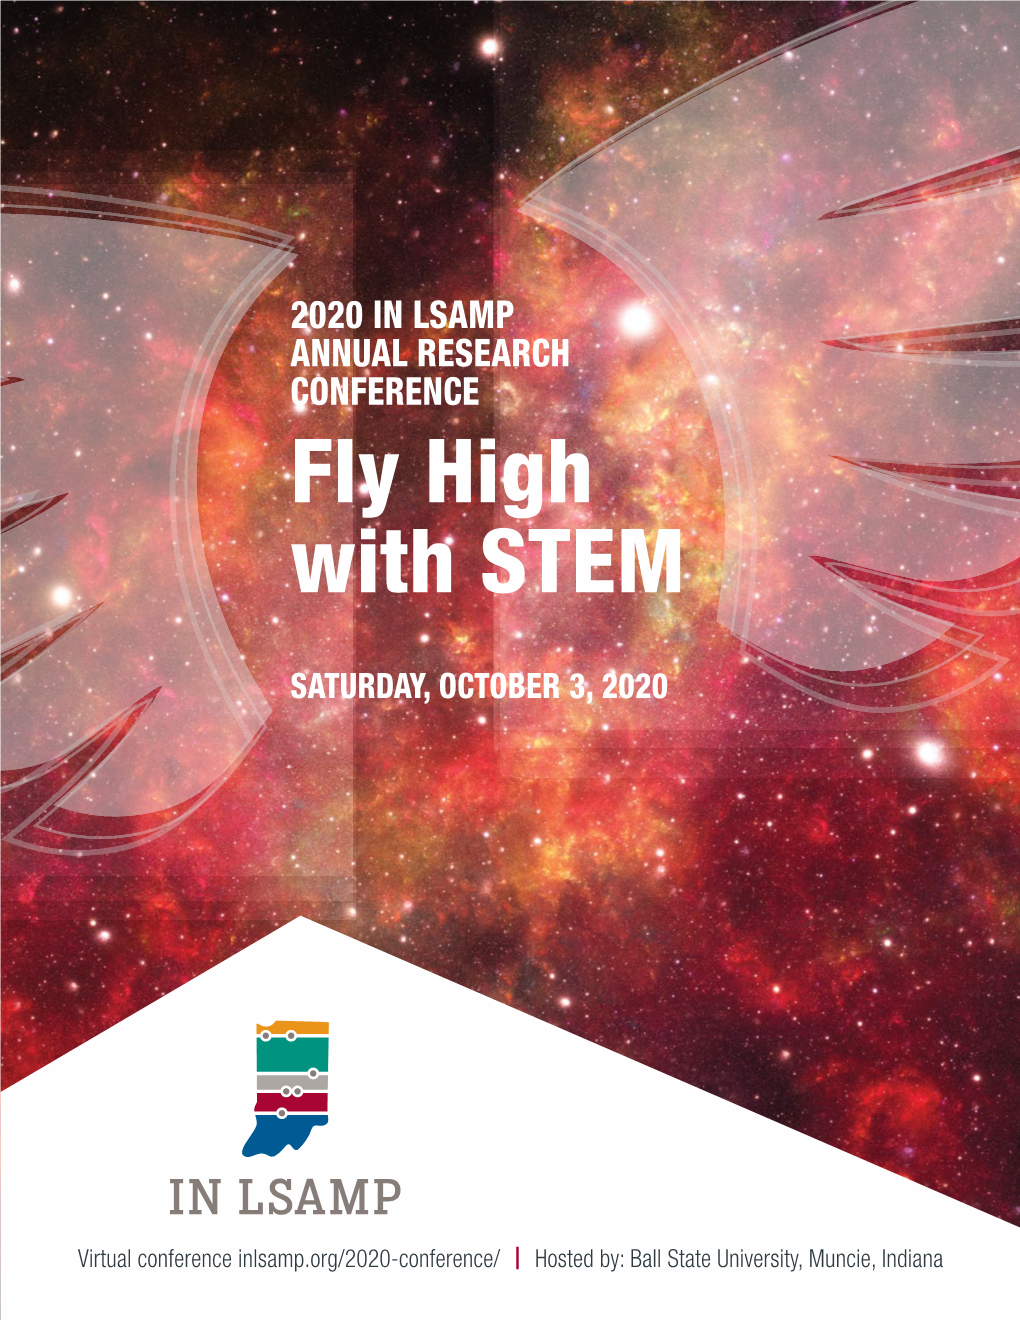 Fly High with STEM